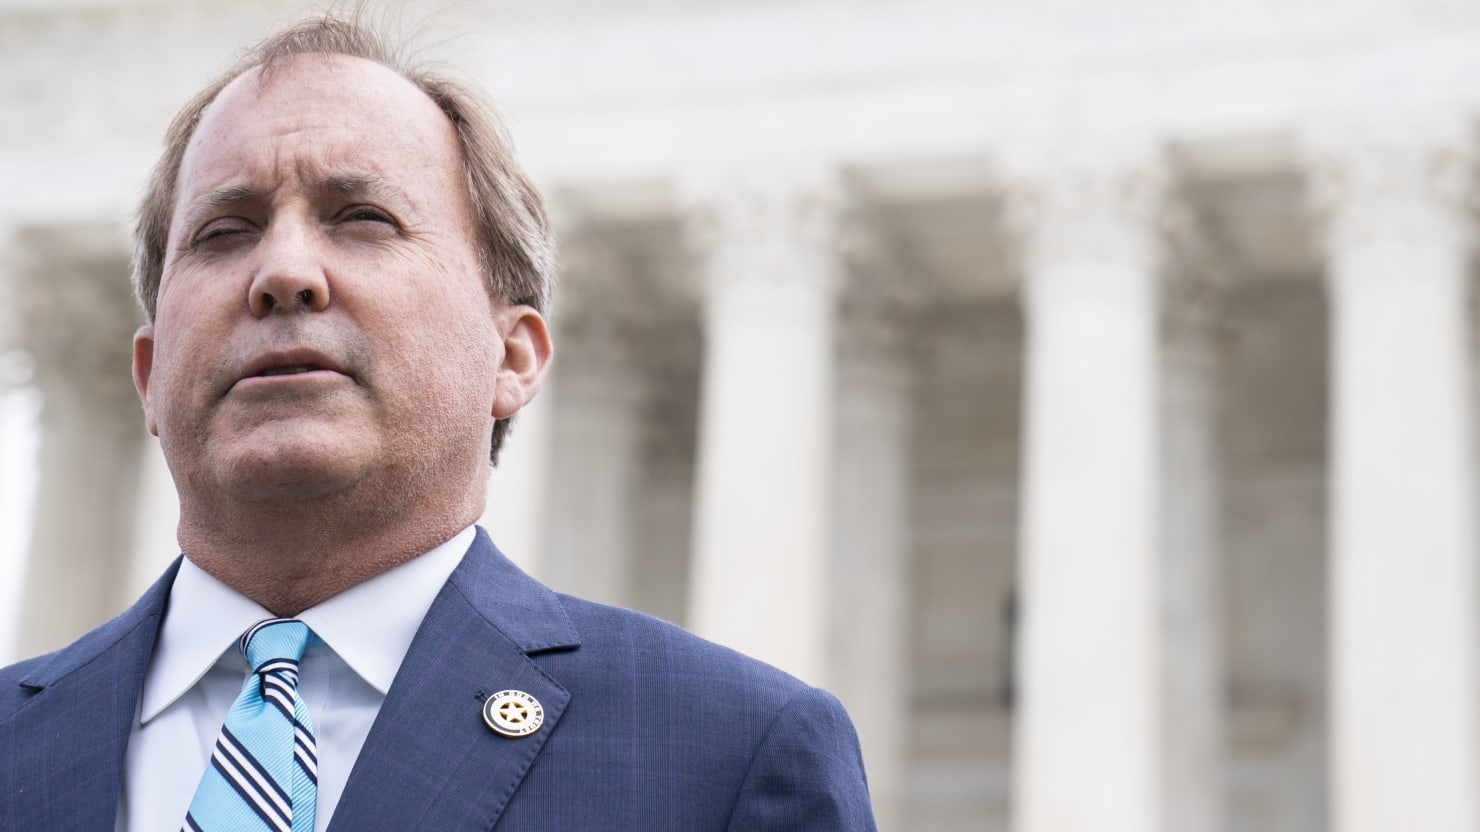 Texas AG Ken Paxton’s Scandal Shocks House Panel’s Conscience Details